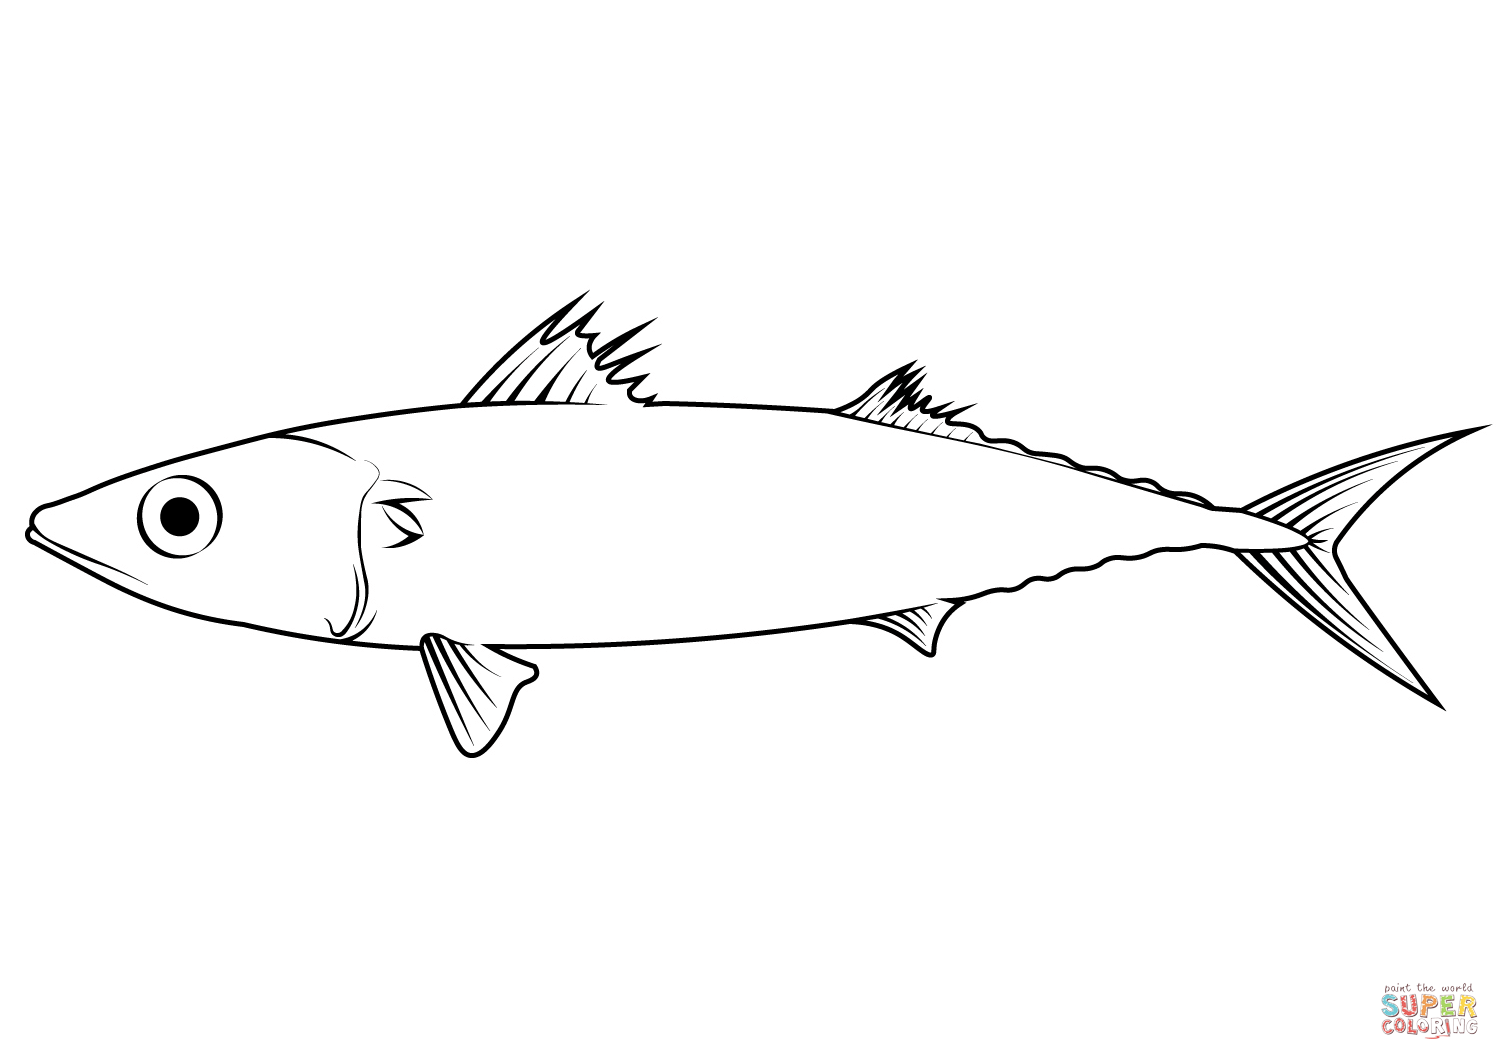 Pacific chub mackerel sber japonicus coloring page free printable coloring pages